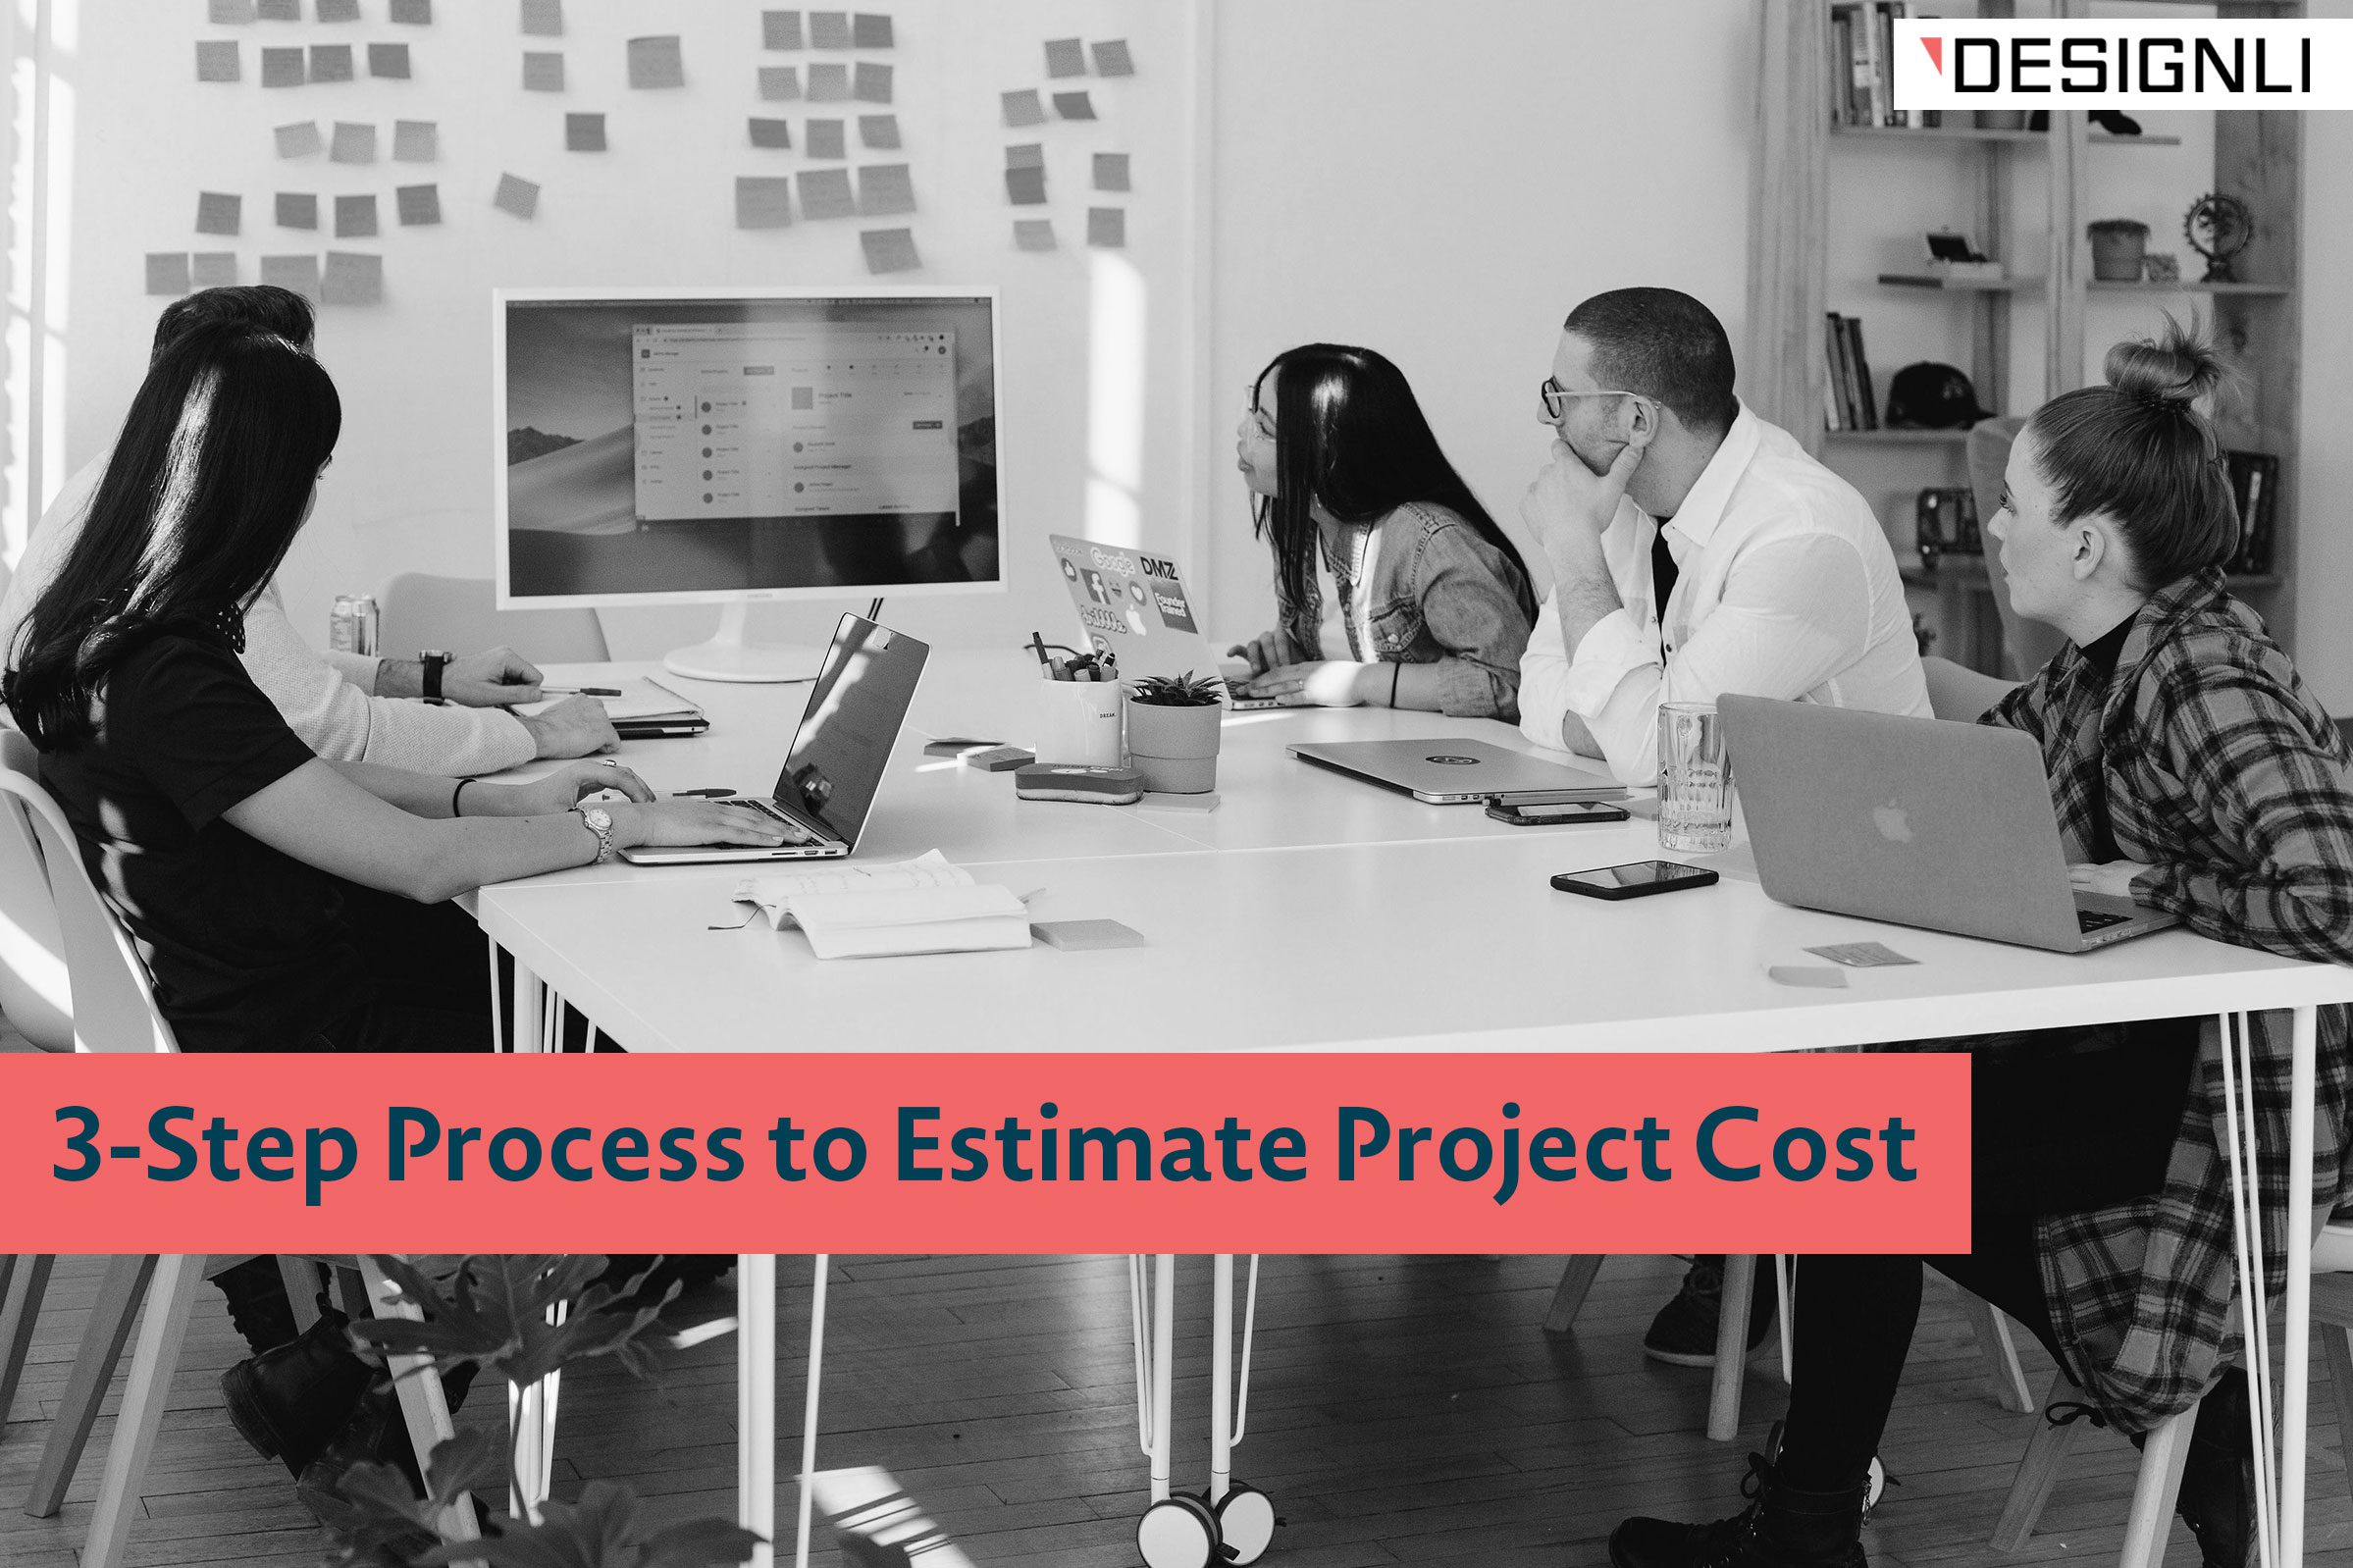 3-Step Process to Estimate Project Cost